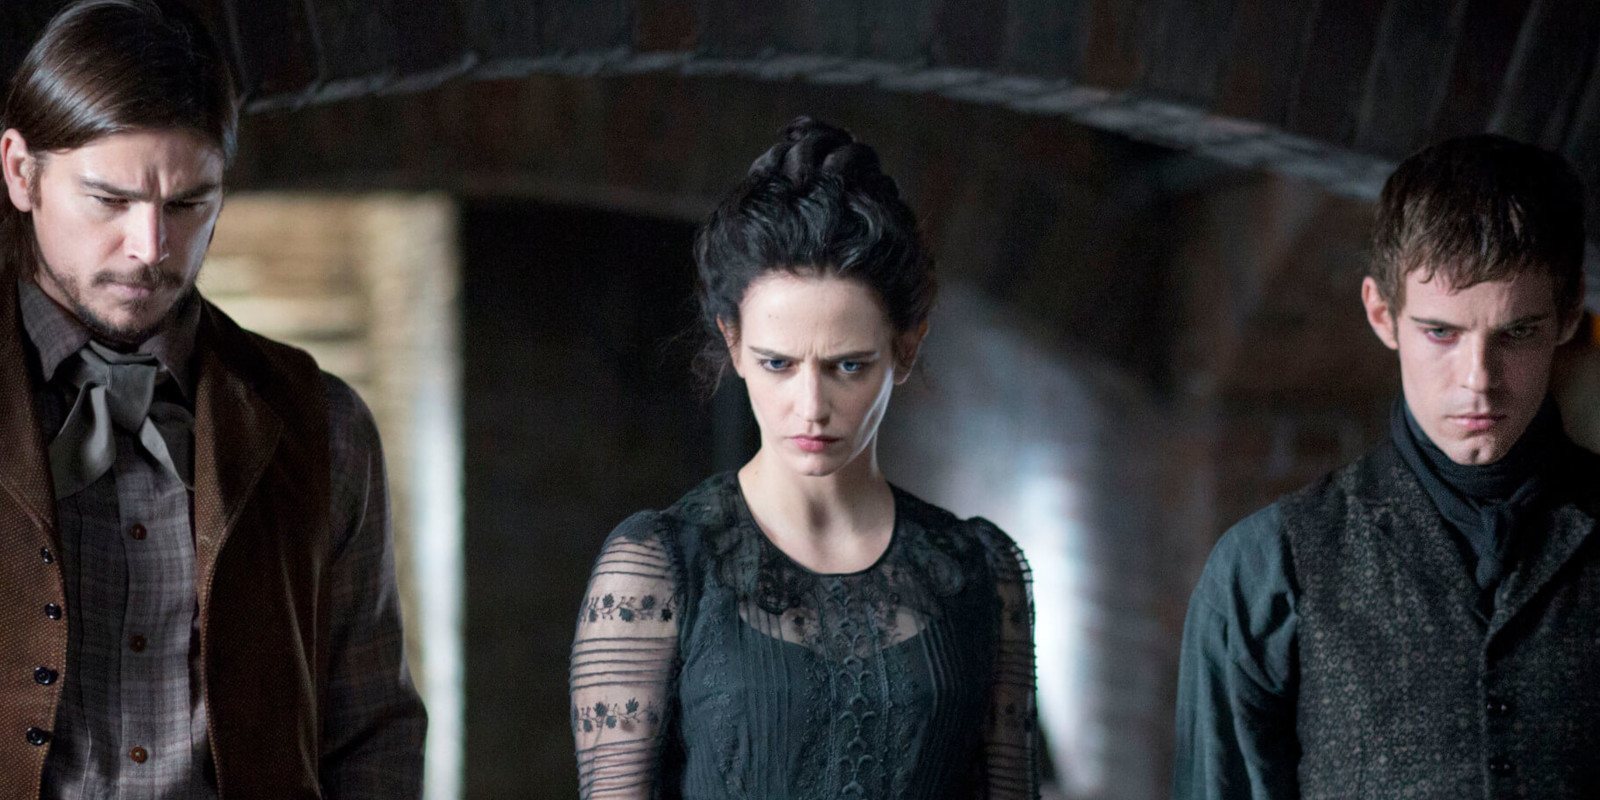 'City of Angels': 'Penny Dreadful' continúa con diferentes personajes